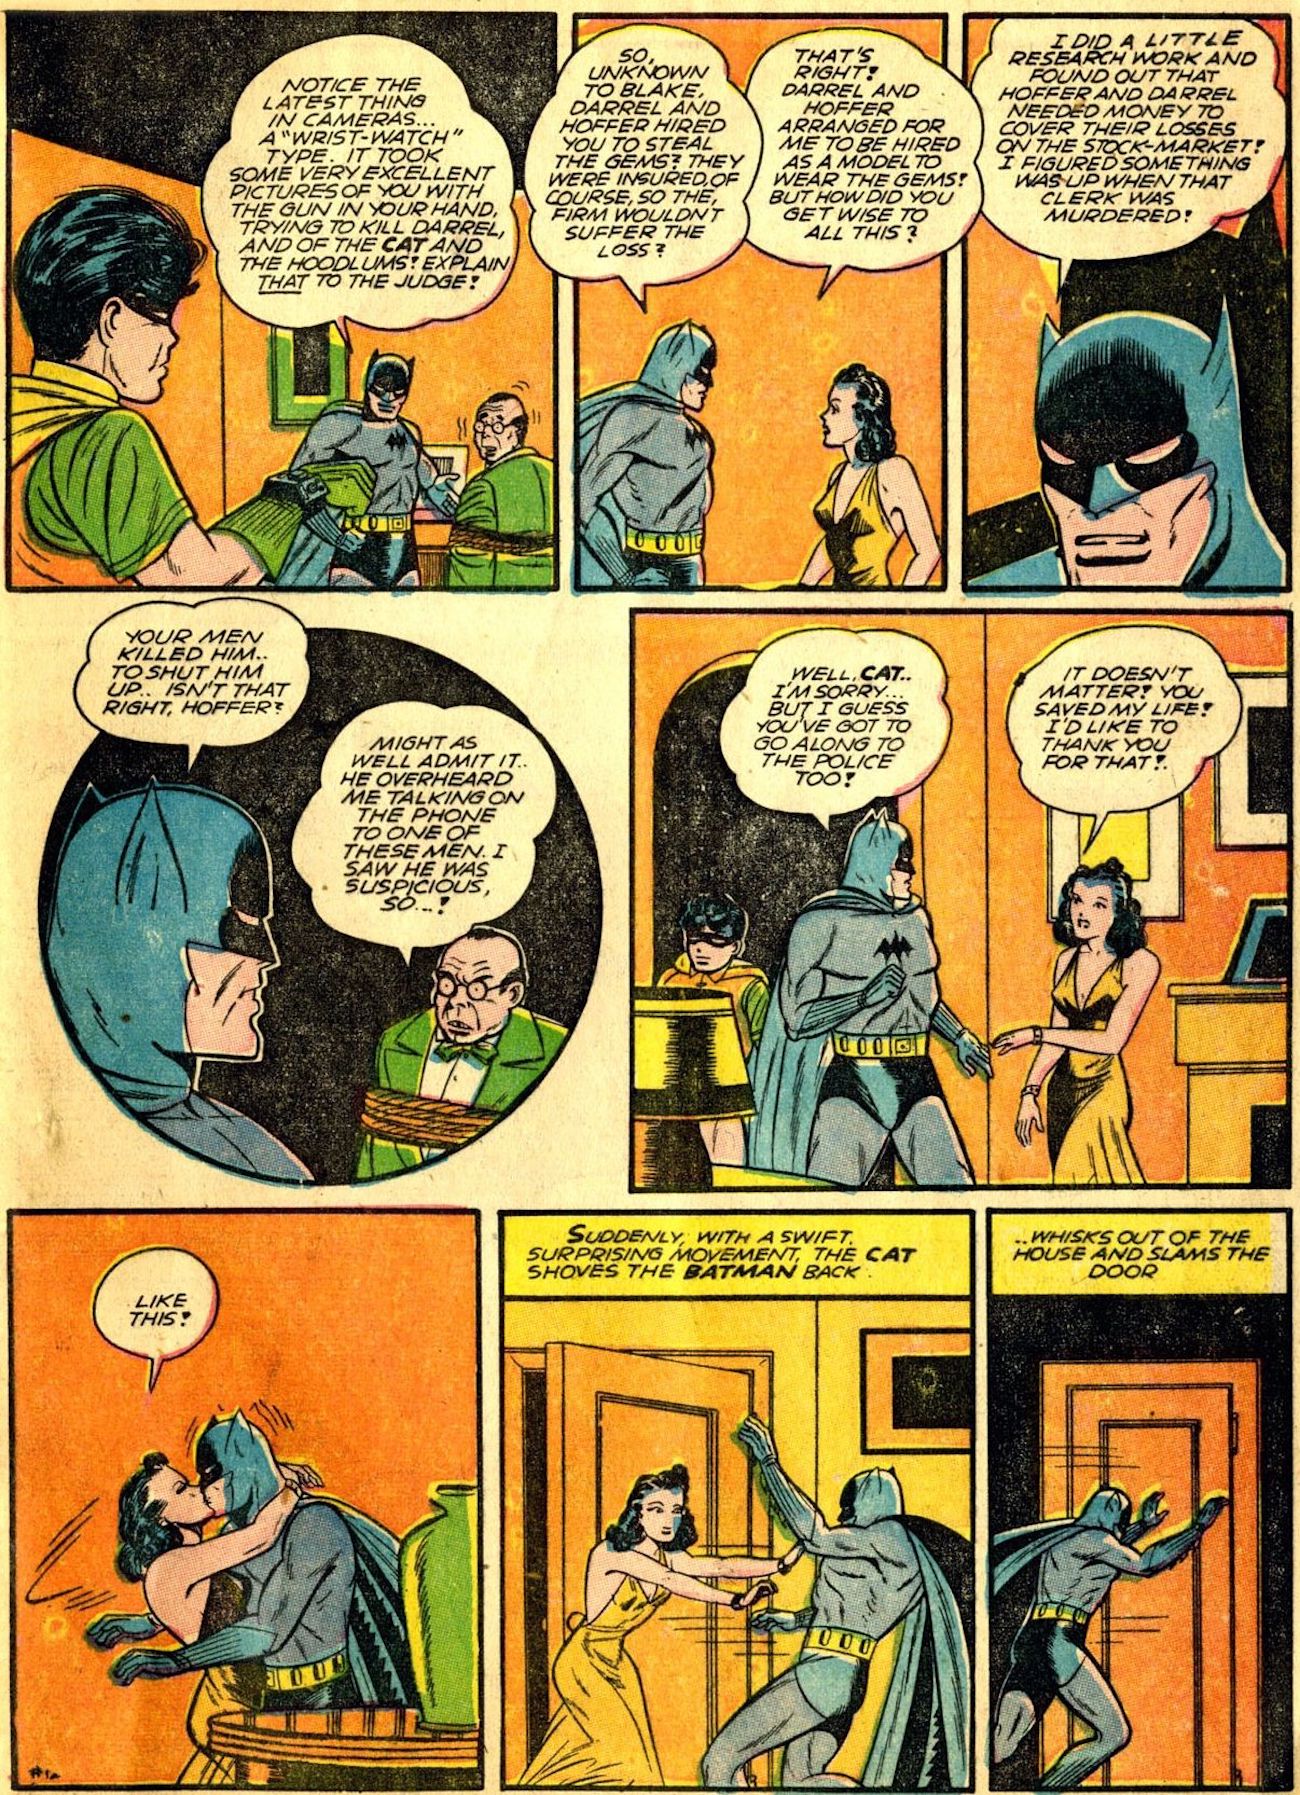 This image shows a comic strip from Batman #3 (1940), where Catwoman and Batman shared their first kiss. 